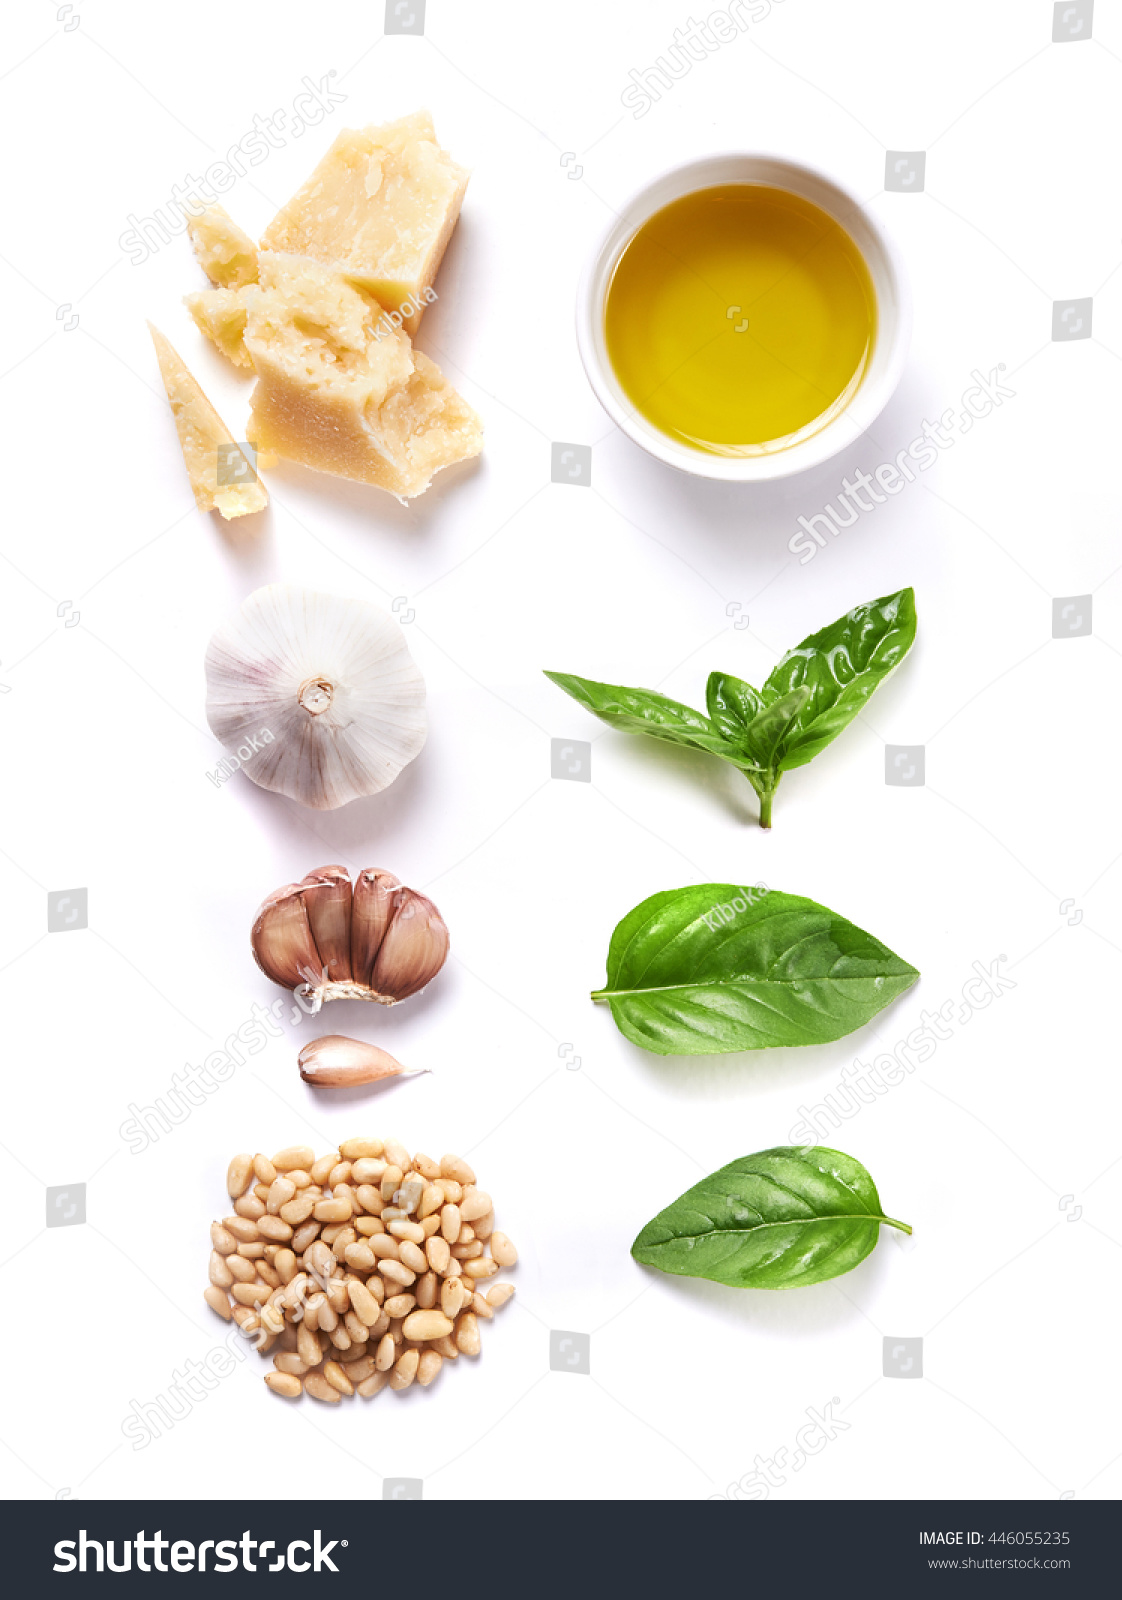 ingredients for pesto isolated on white background. top view #446055235